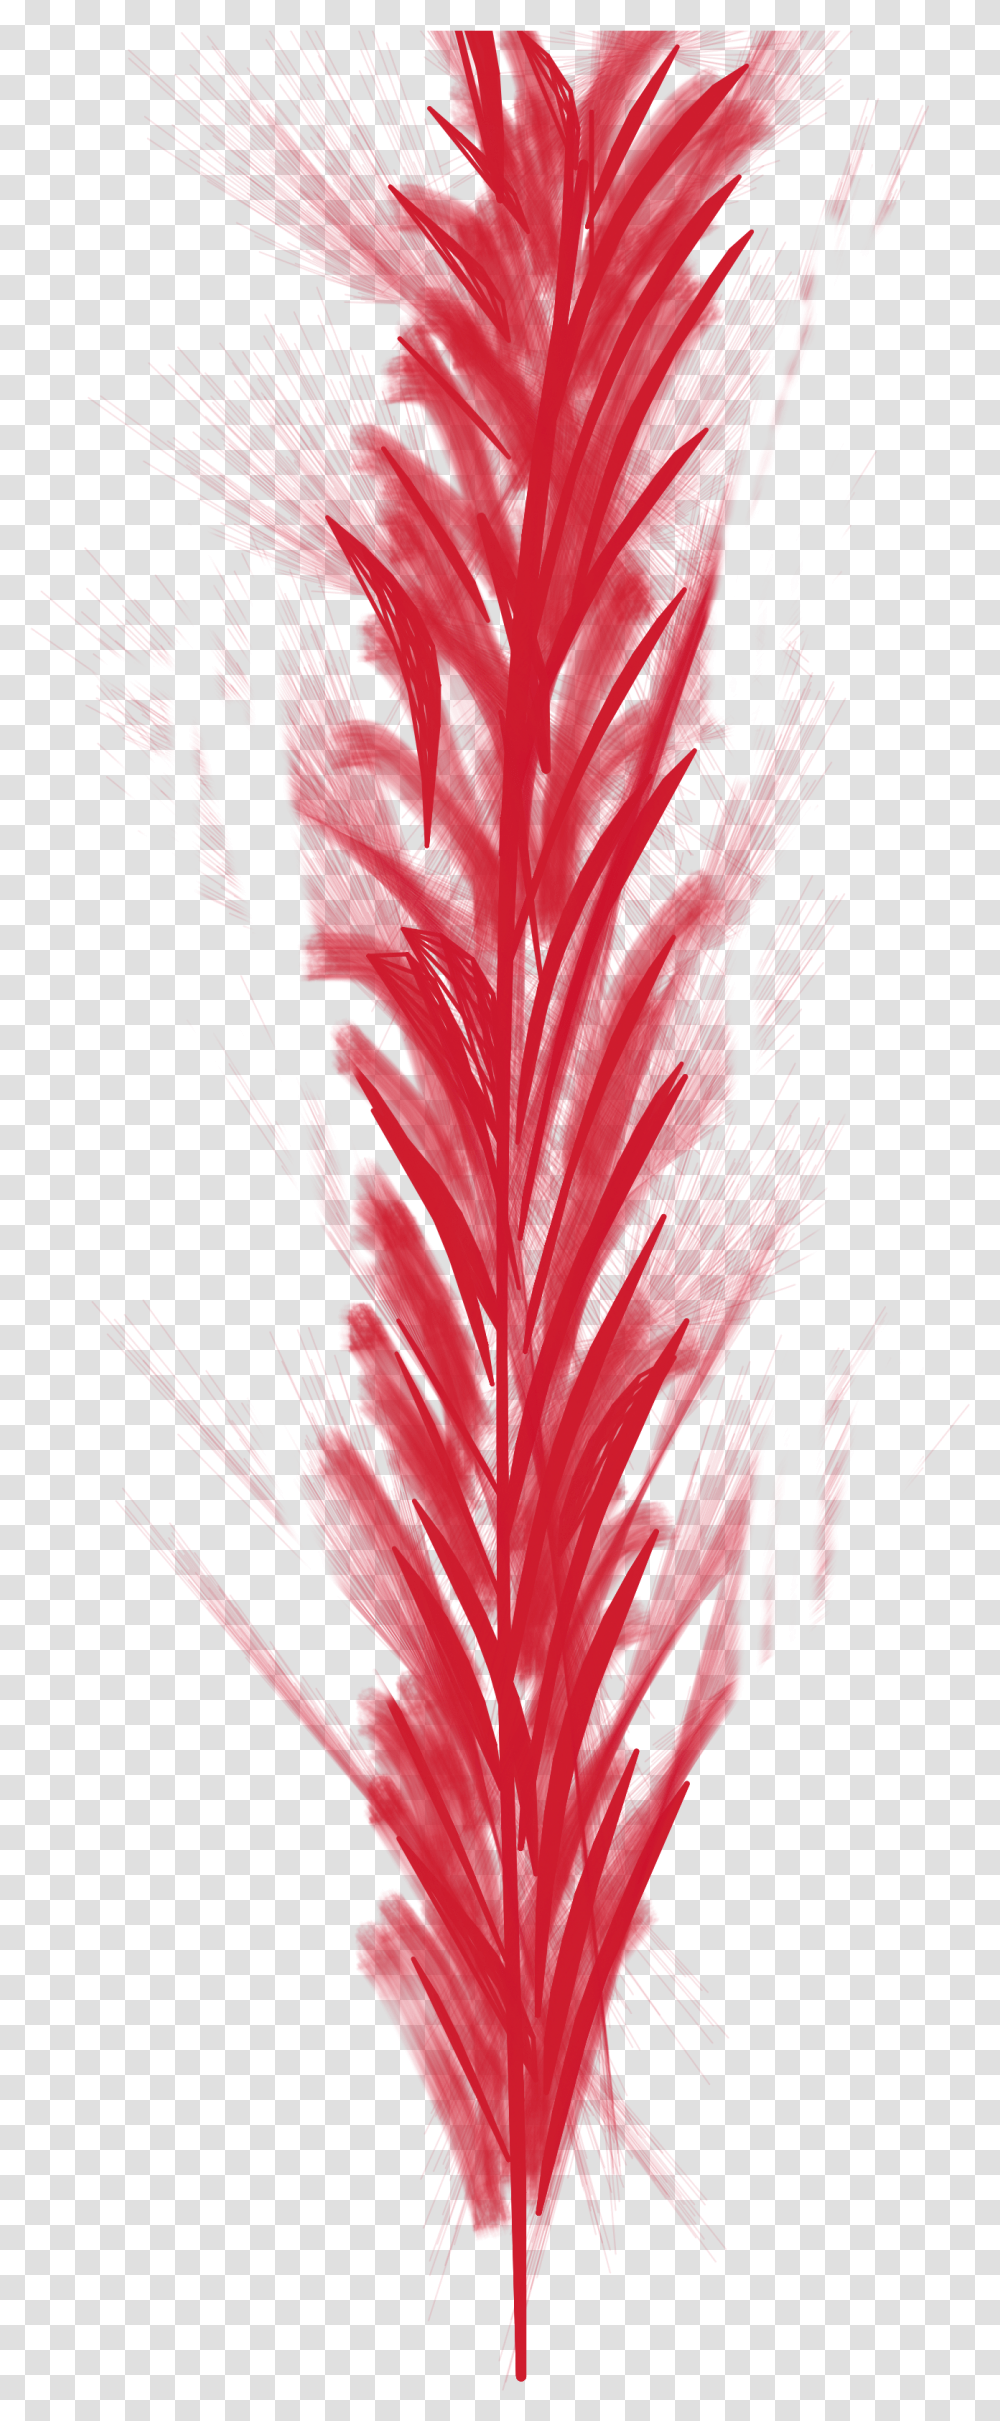 Red Feather Bird Fly Fluff Pillow Feathered, Nature, Outdoors Transparent Png